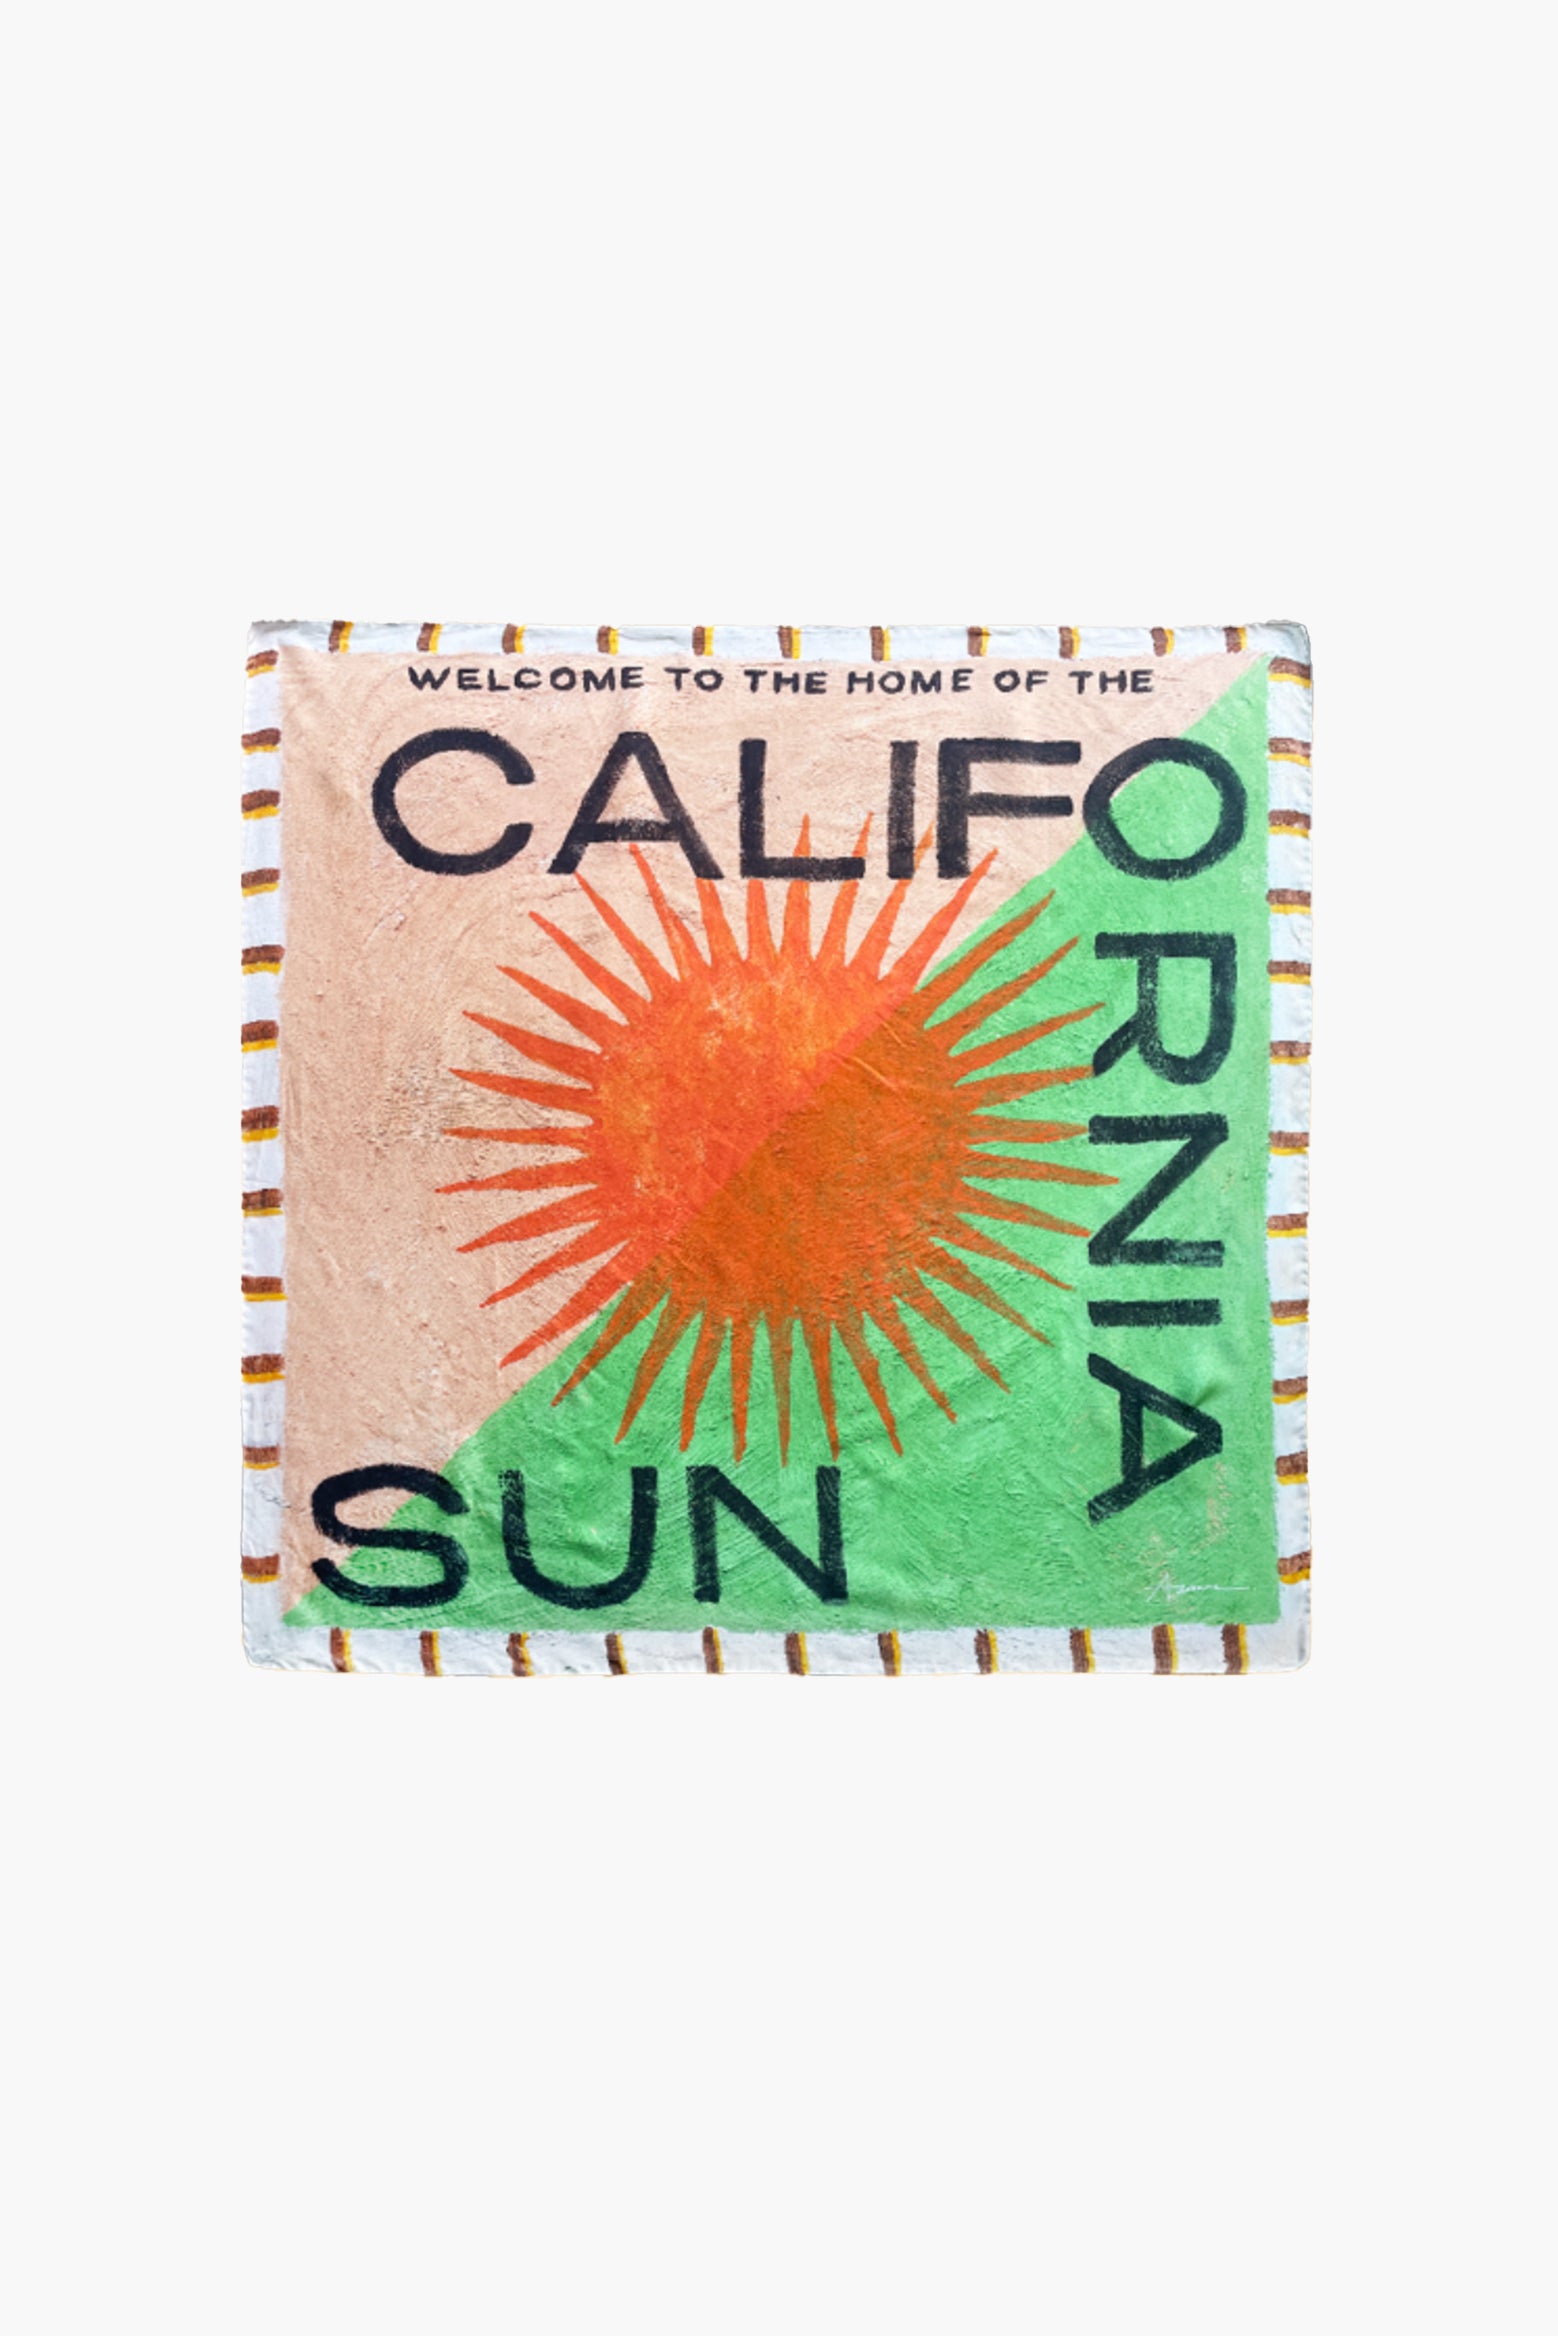 Atlas Silk Travel Scarf in California Sun available at The New Trend Australia.